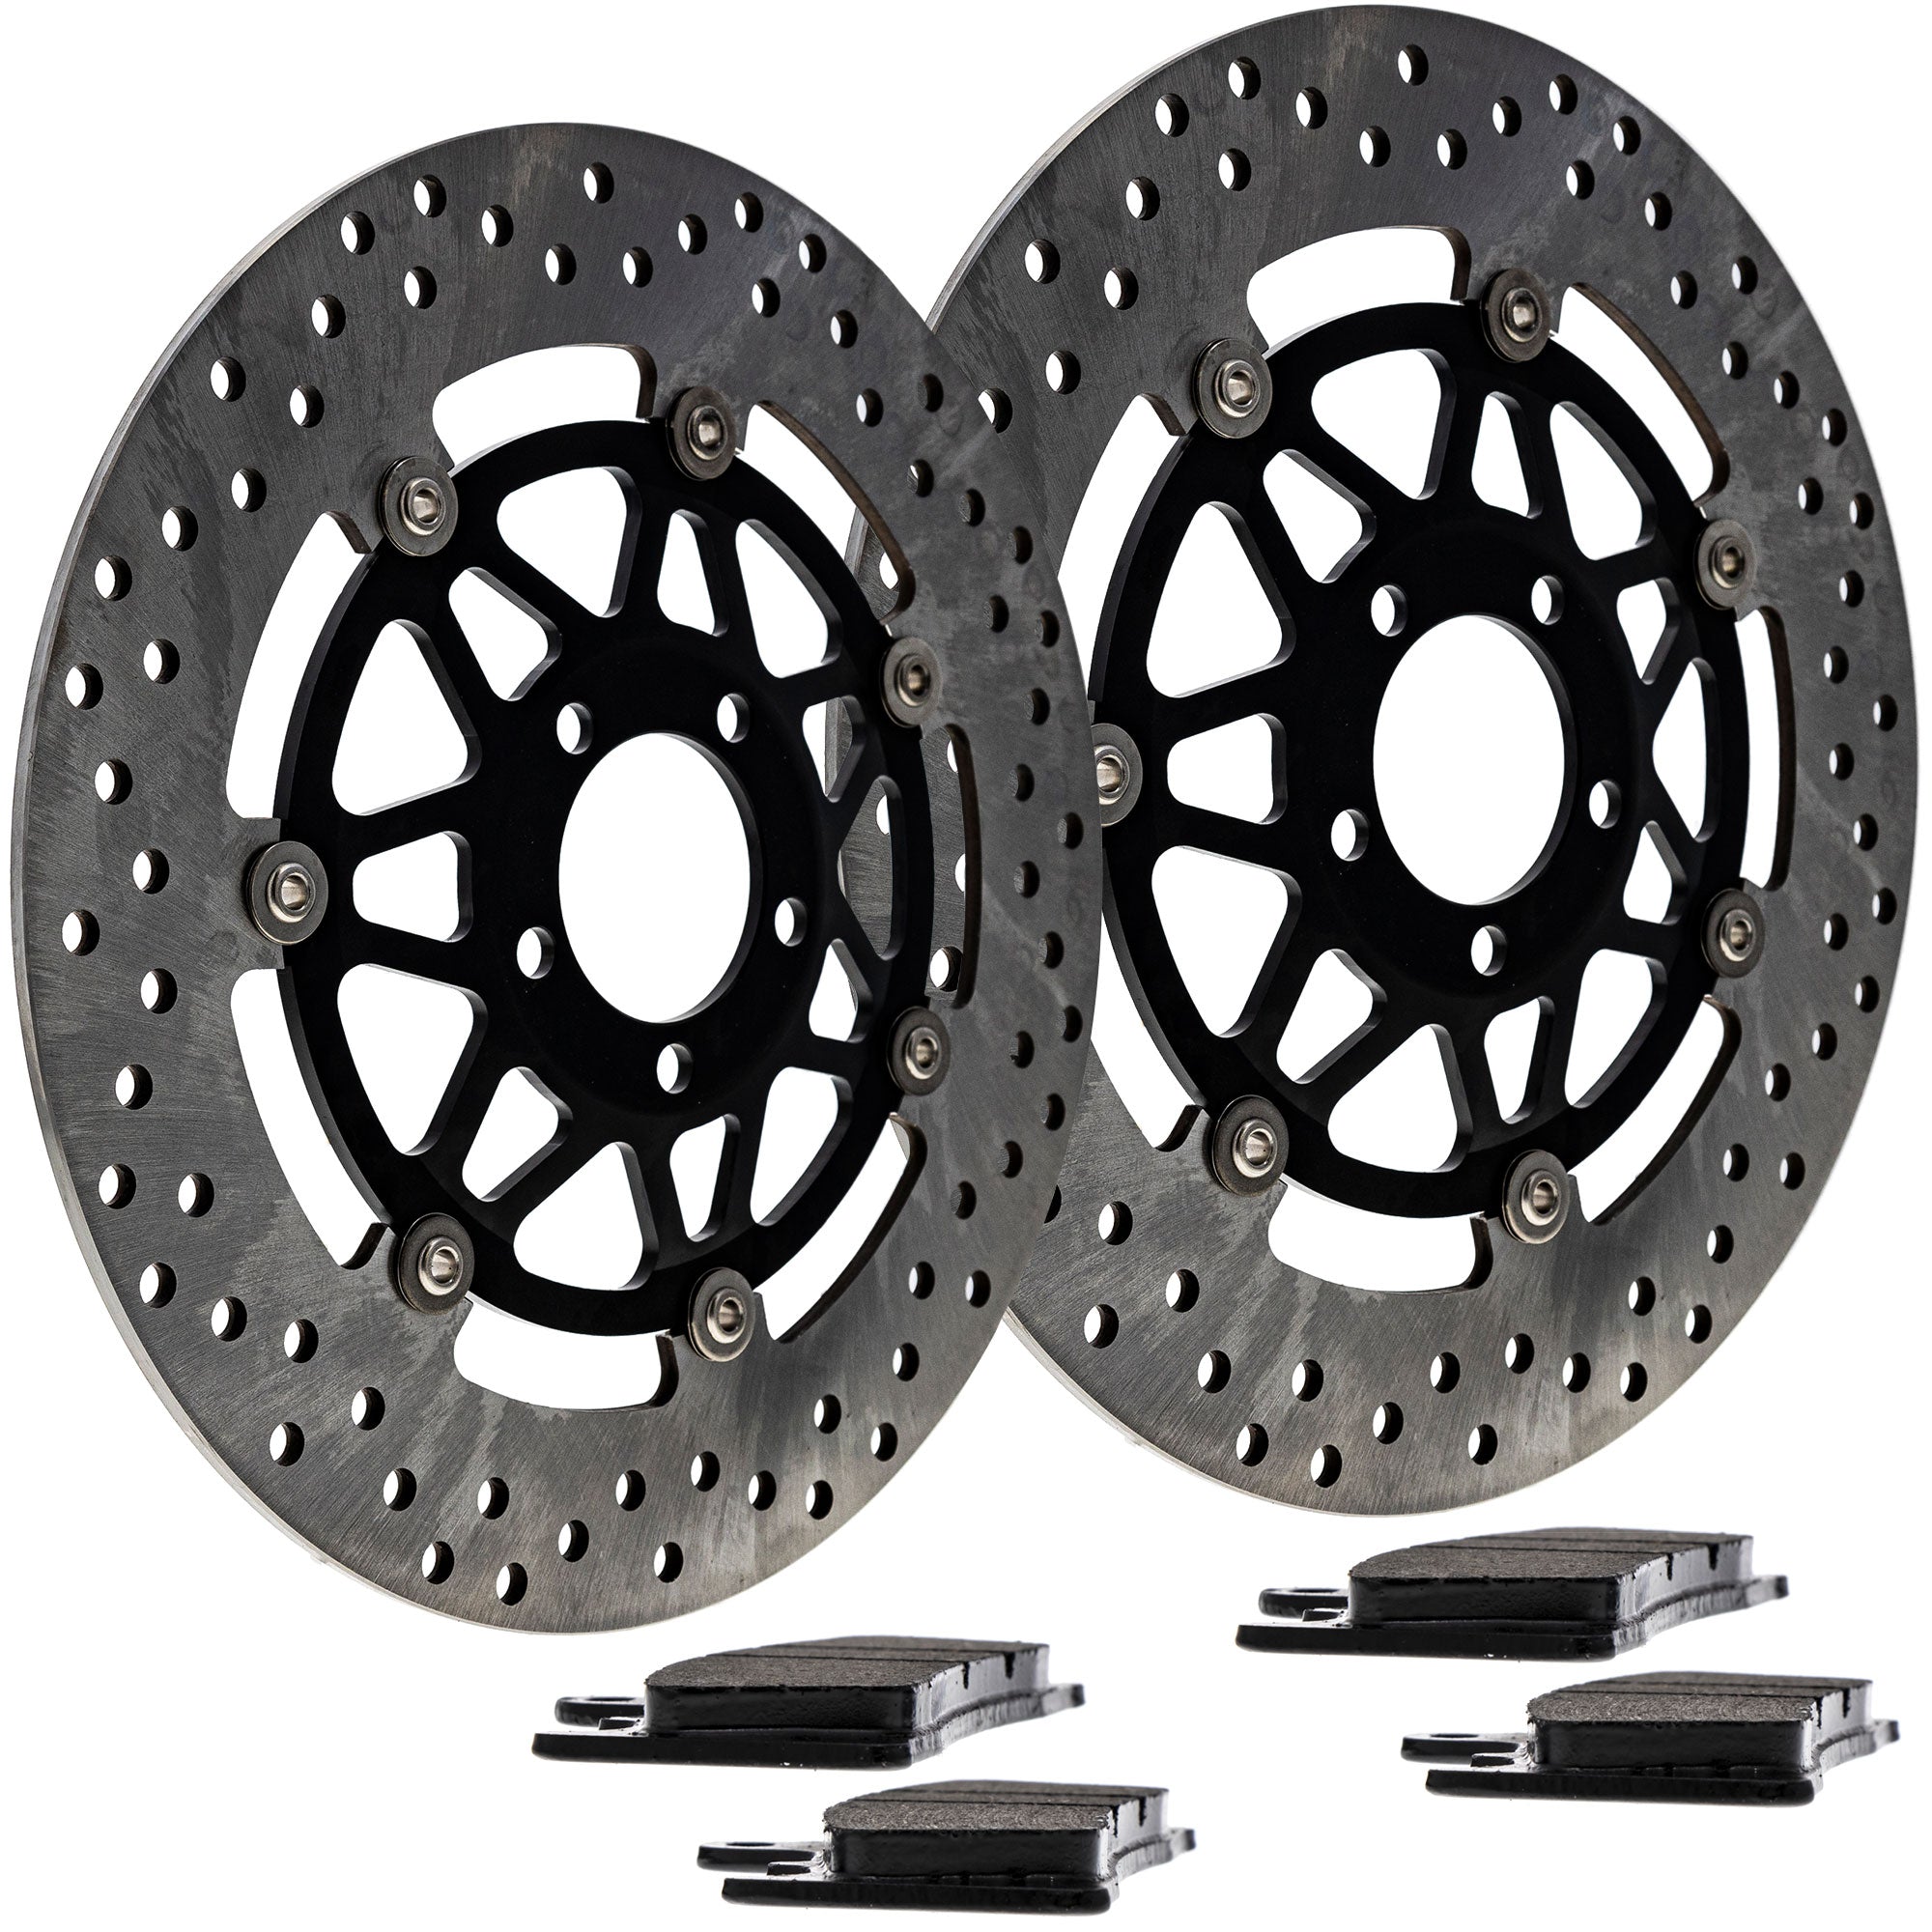 Complete Front or Rear Pad and Rotor Set for zOTHER Victory Triumph Suzuki Honda BMW NICHE MK1006702